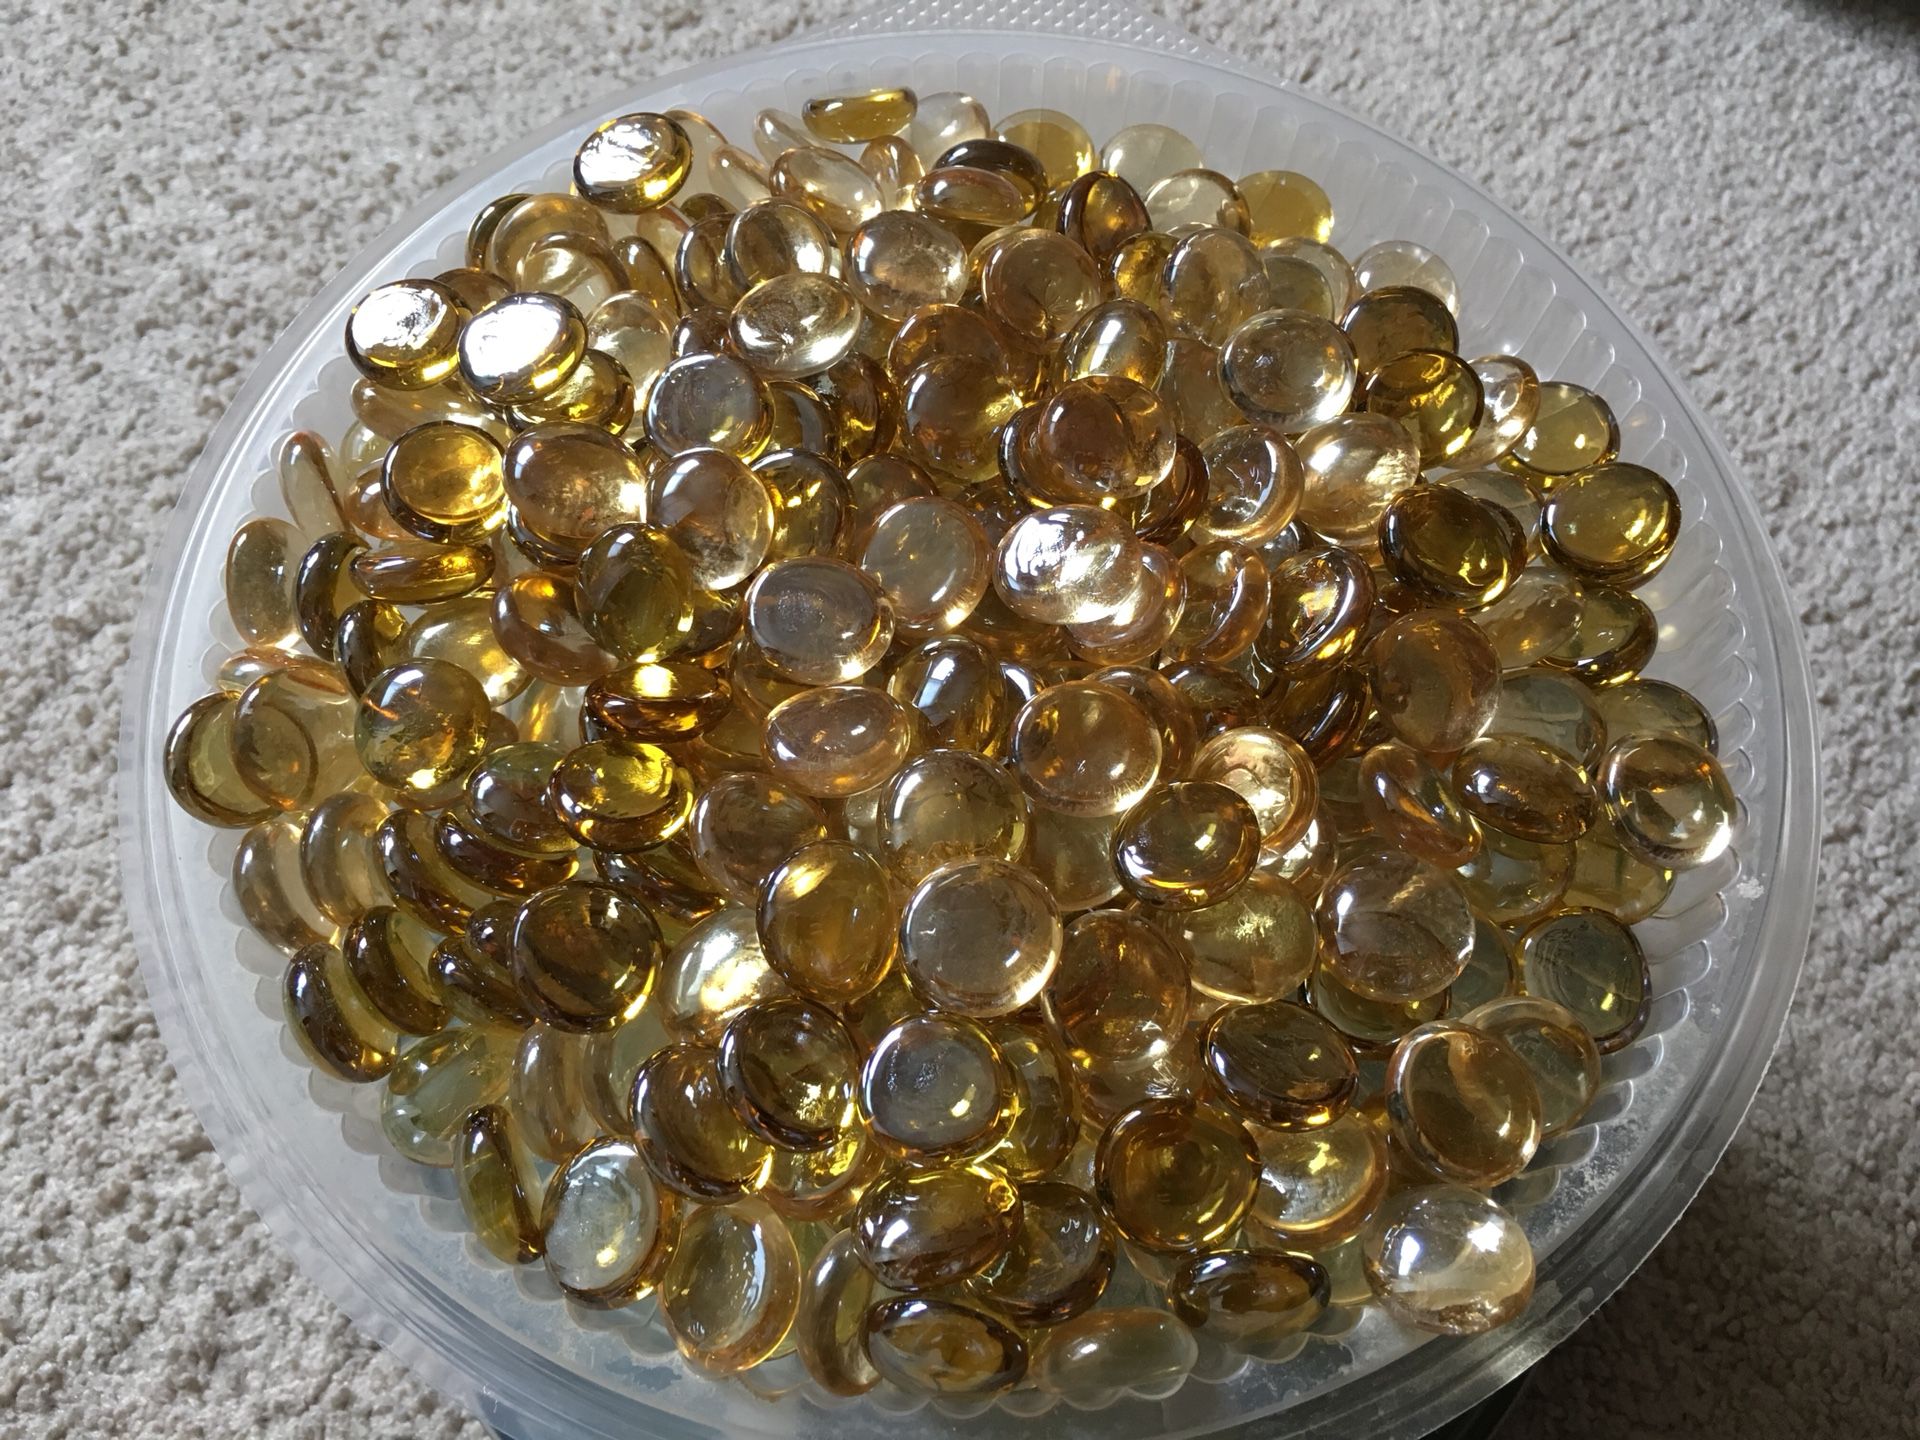 Decorative glass marbles - gold, yellow and light tones